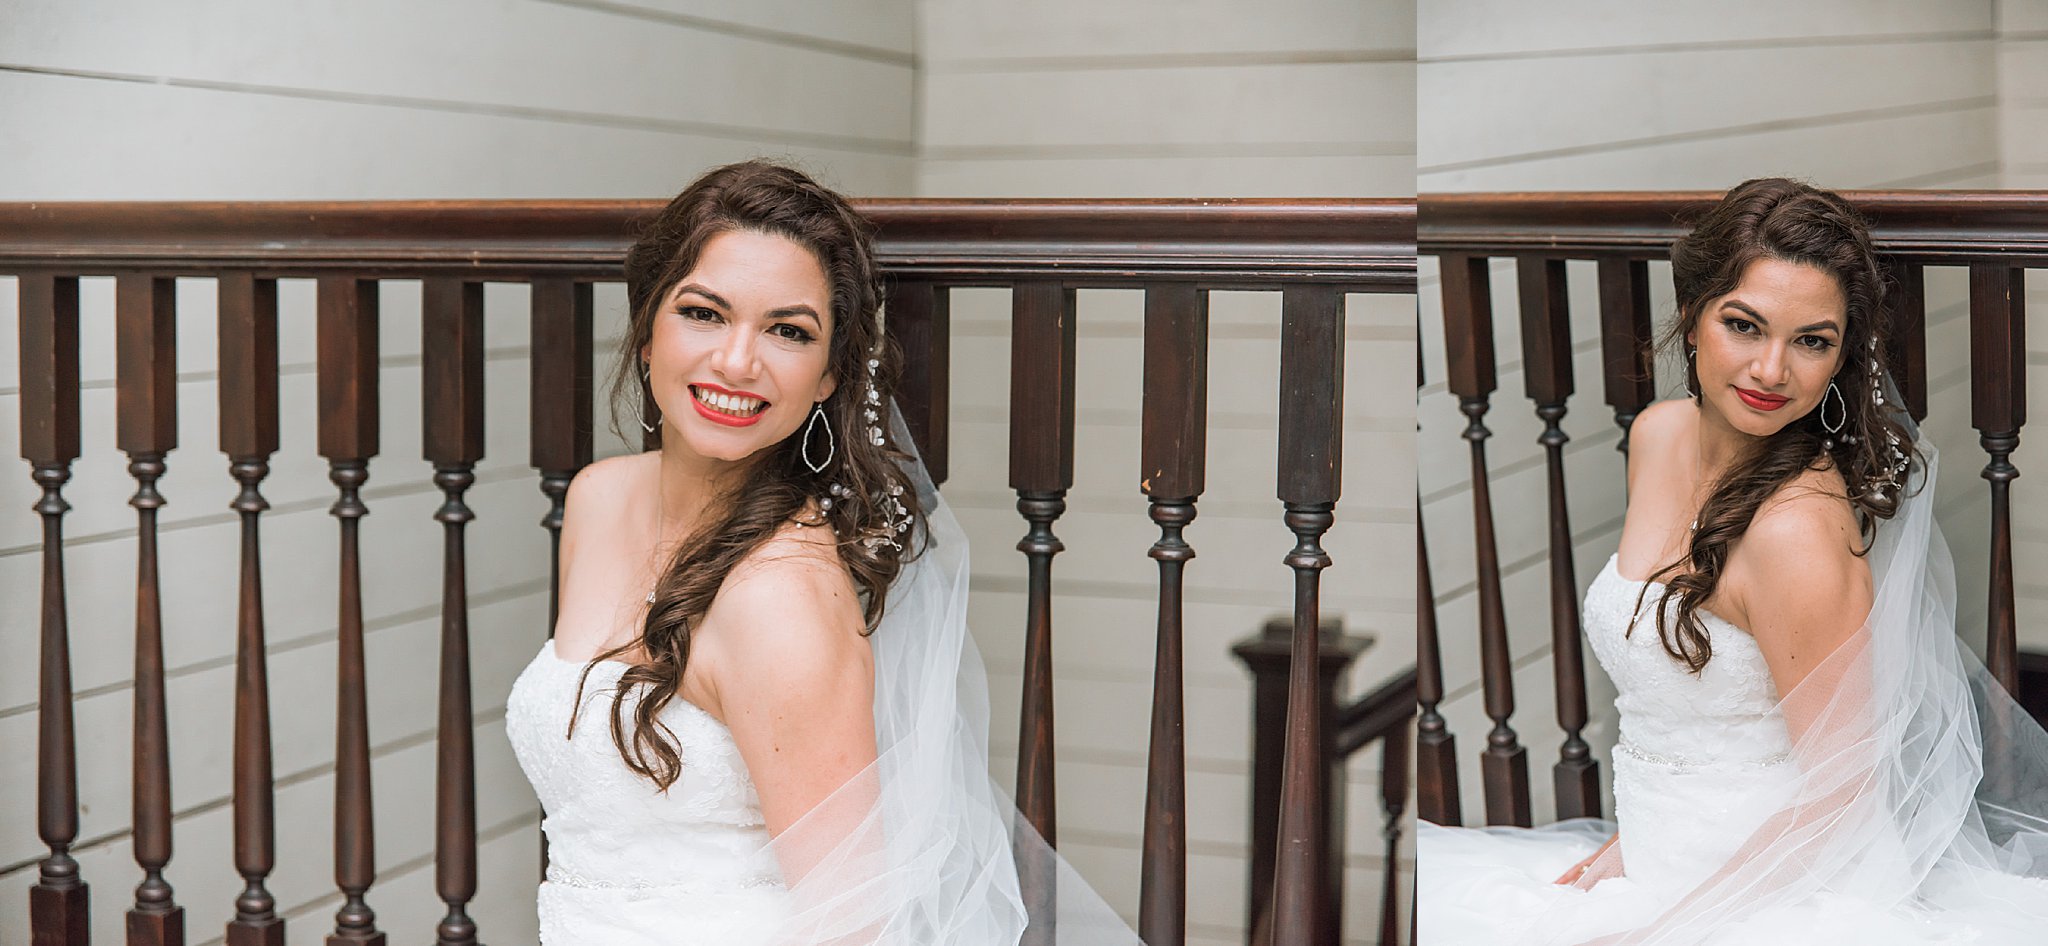 Bride seated in fluffy white wedding dress at top of stair railing